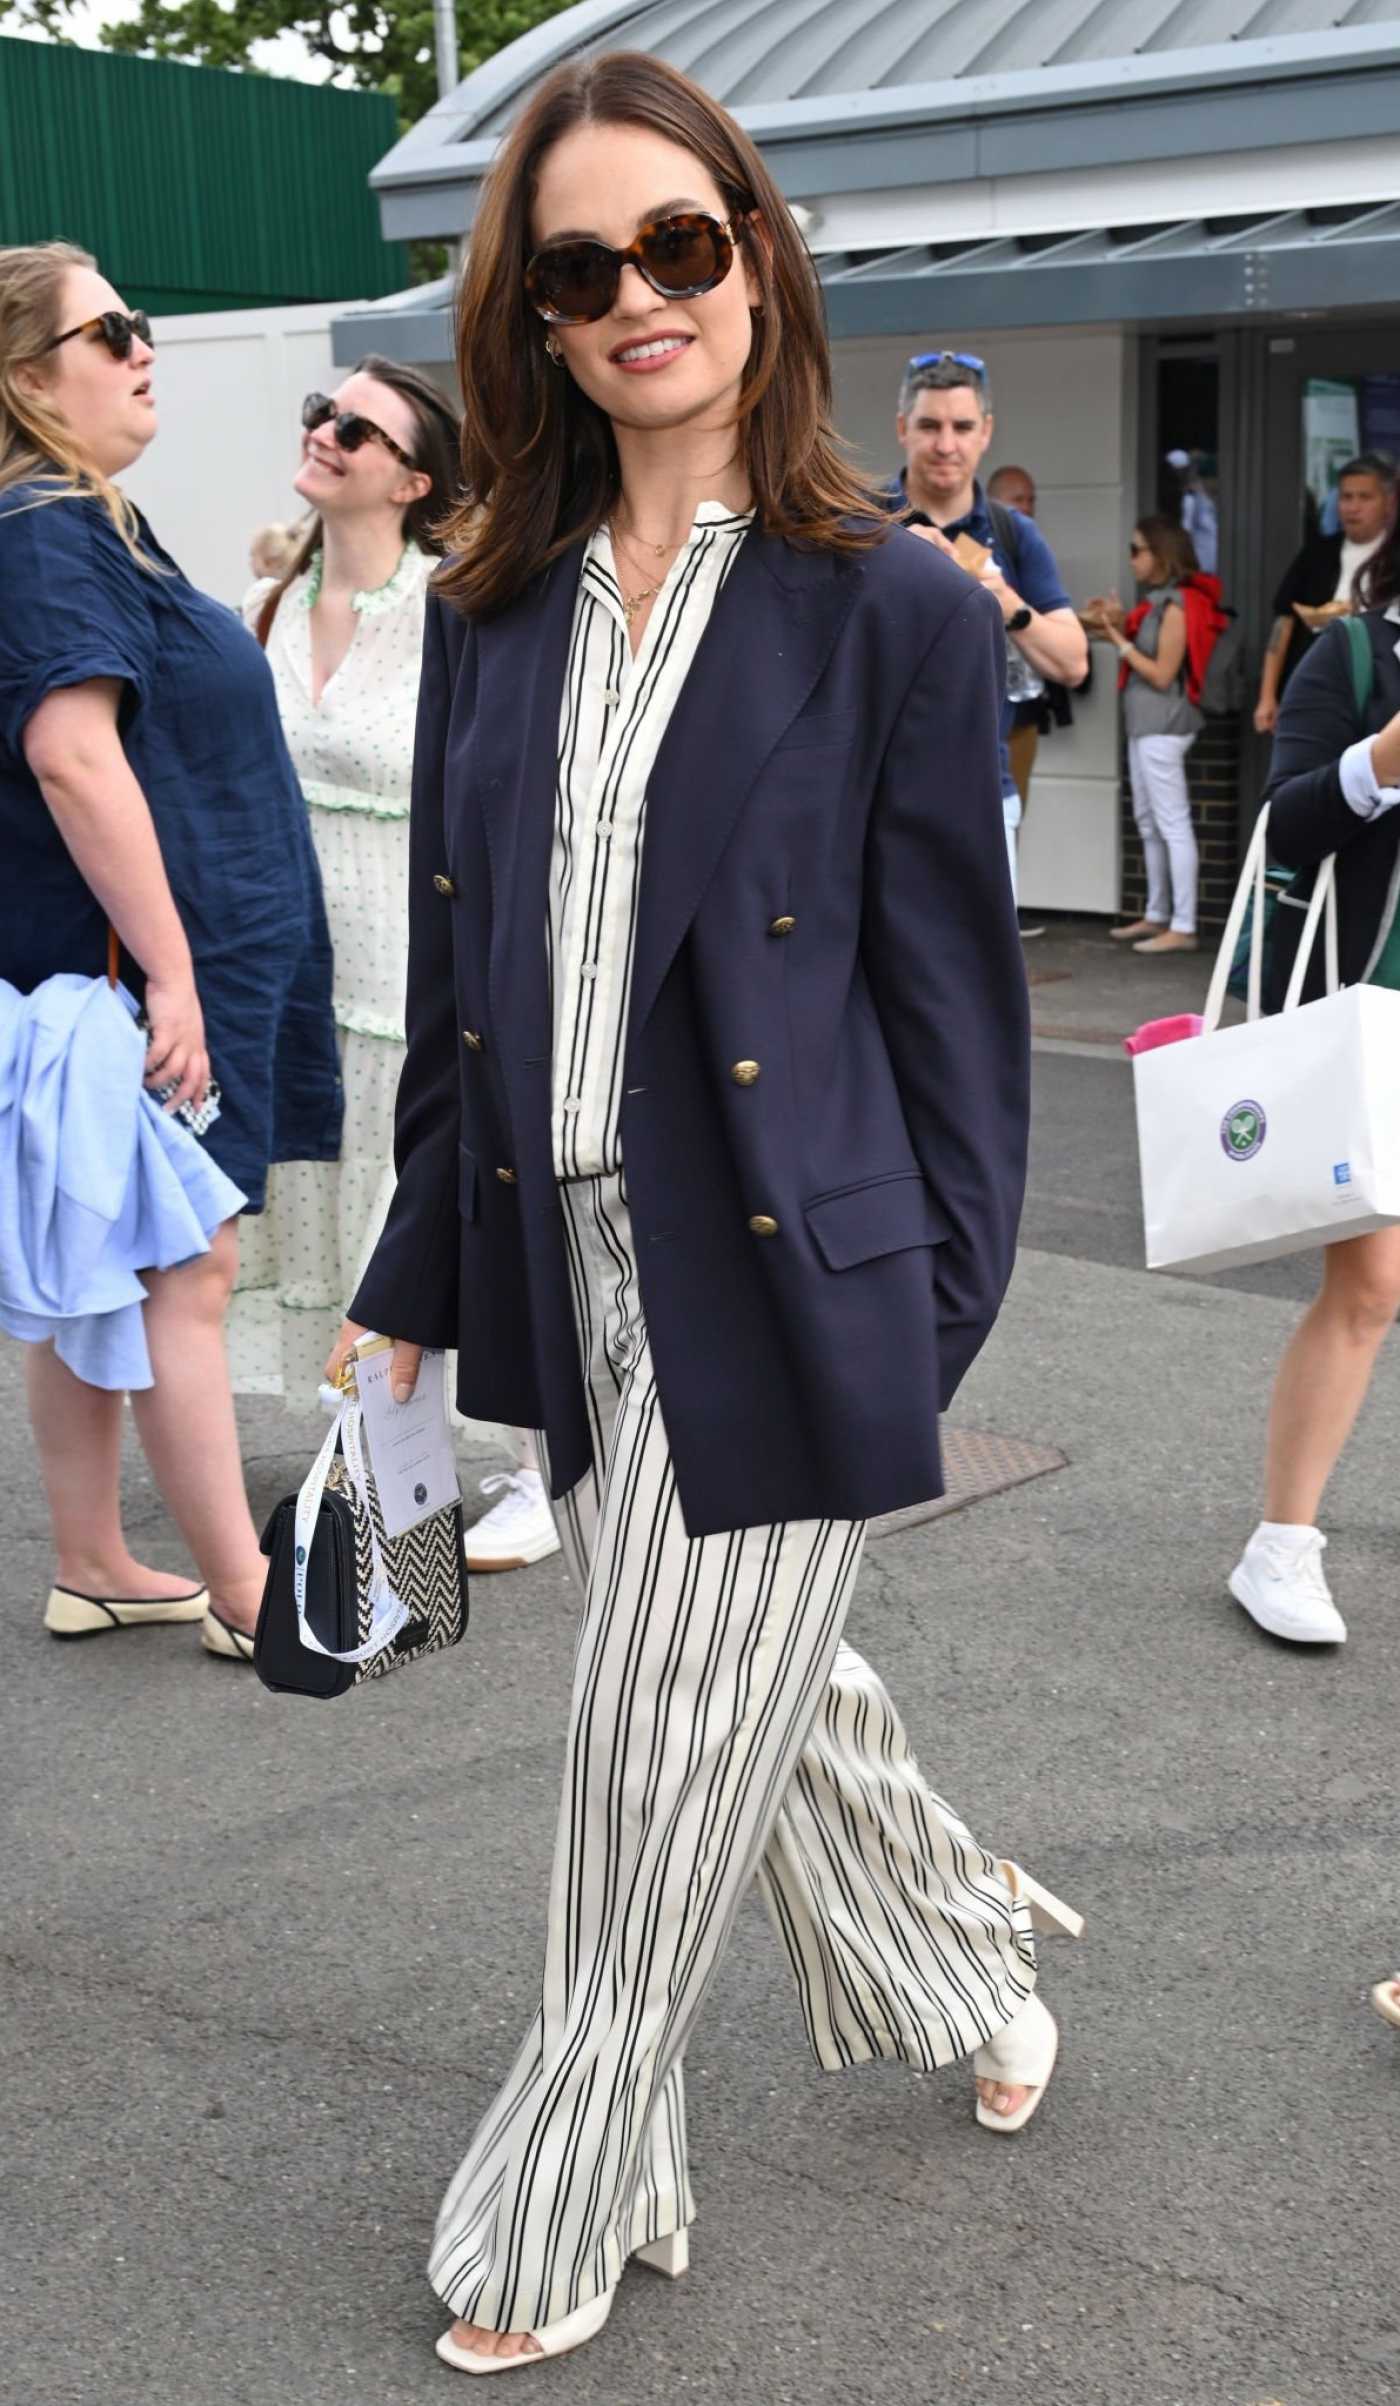 Lily James in a Striped Pants Arrives at the Men's Final Match at 2023 Wimbledon Tennis Championship in London 07/16/2023